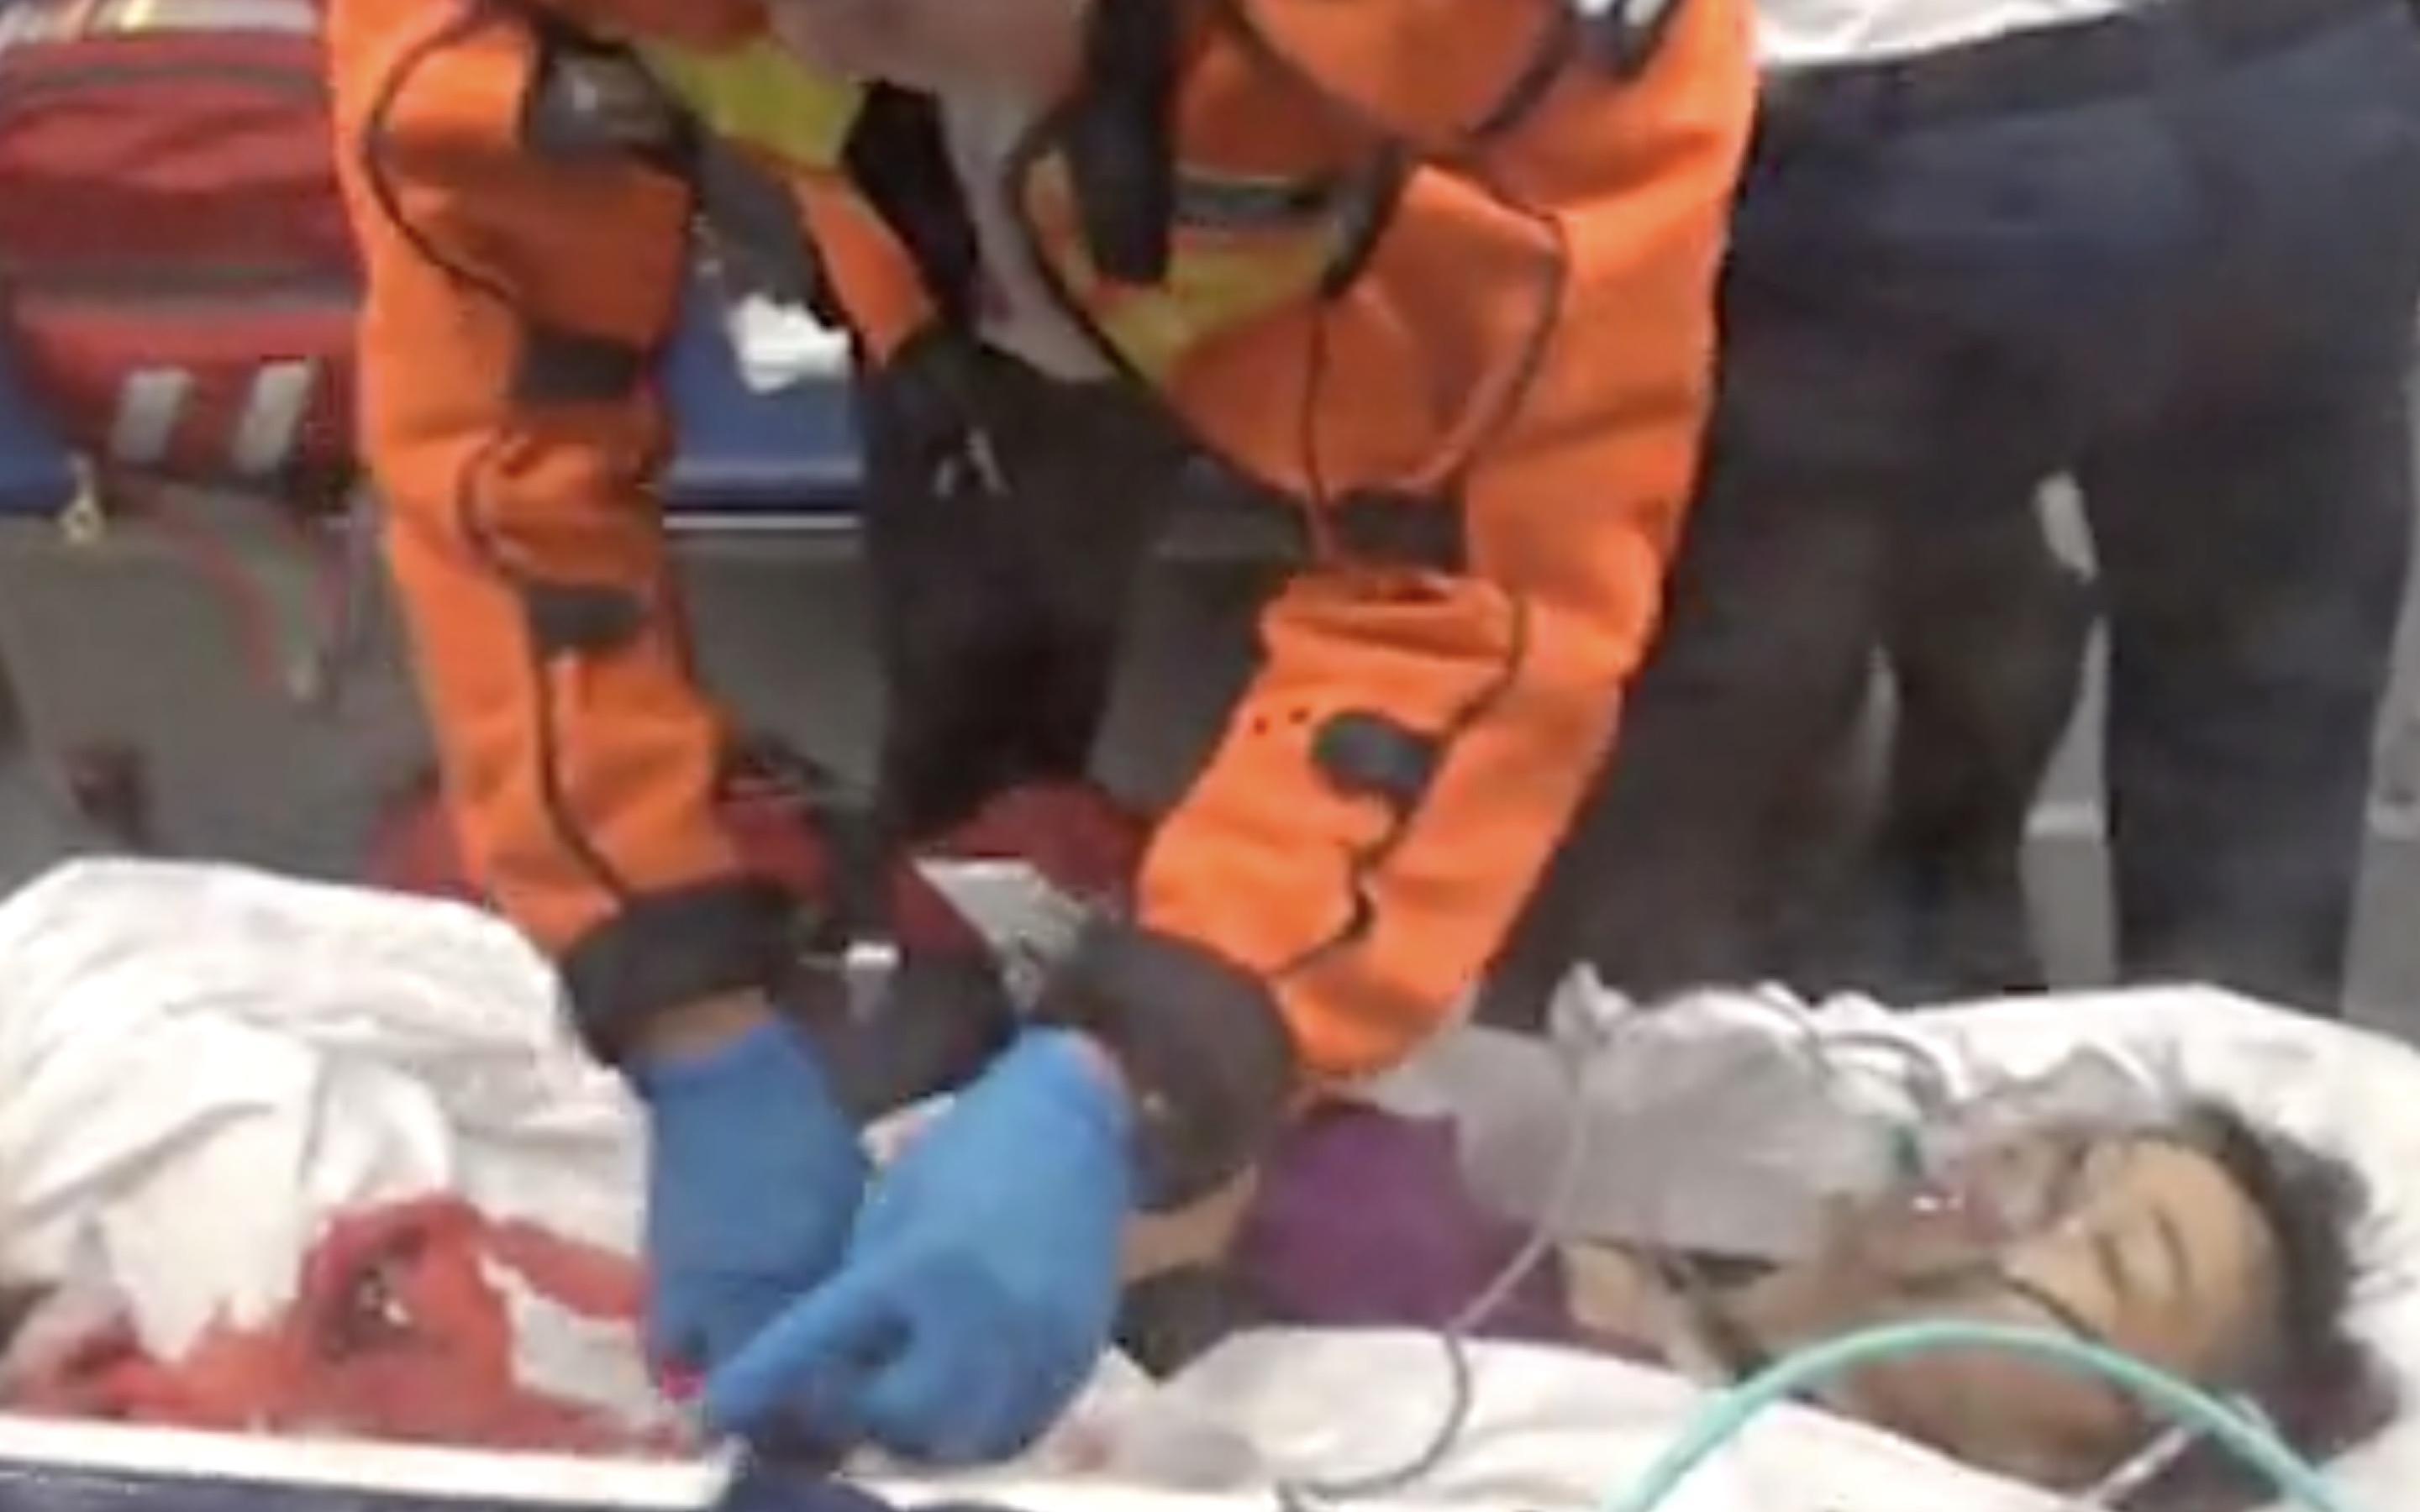 A 35-year-old woman is taken to hospital after she got stabbed five times in the abdomen by her ex-husband. Screengrab via Apple Daily video.